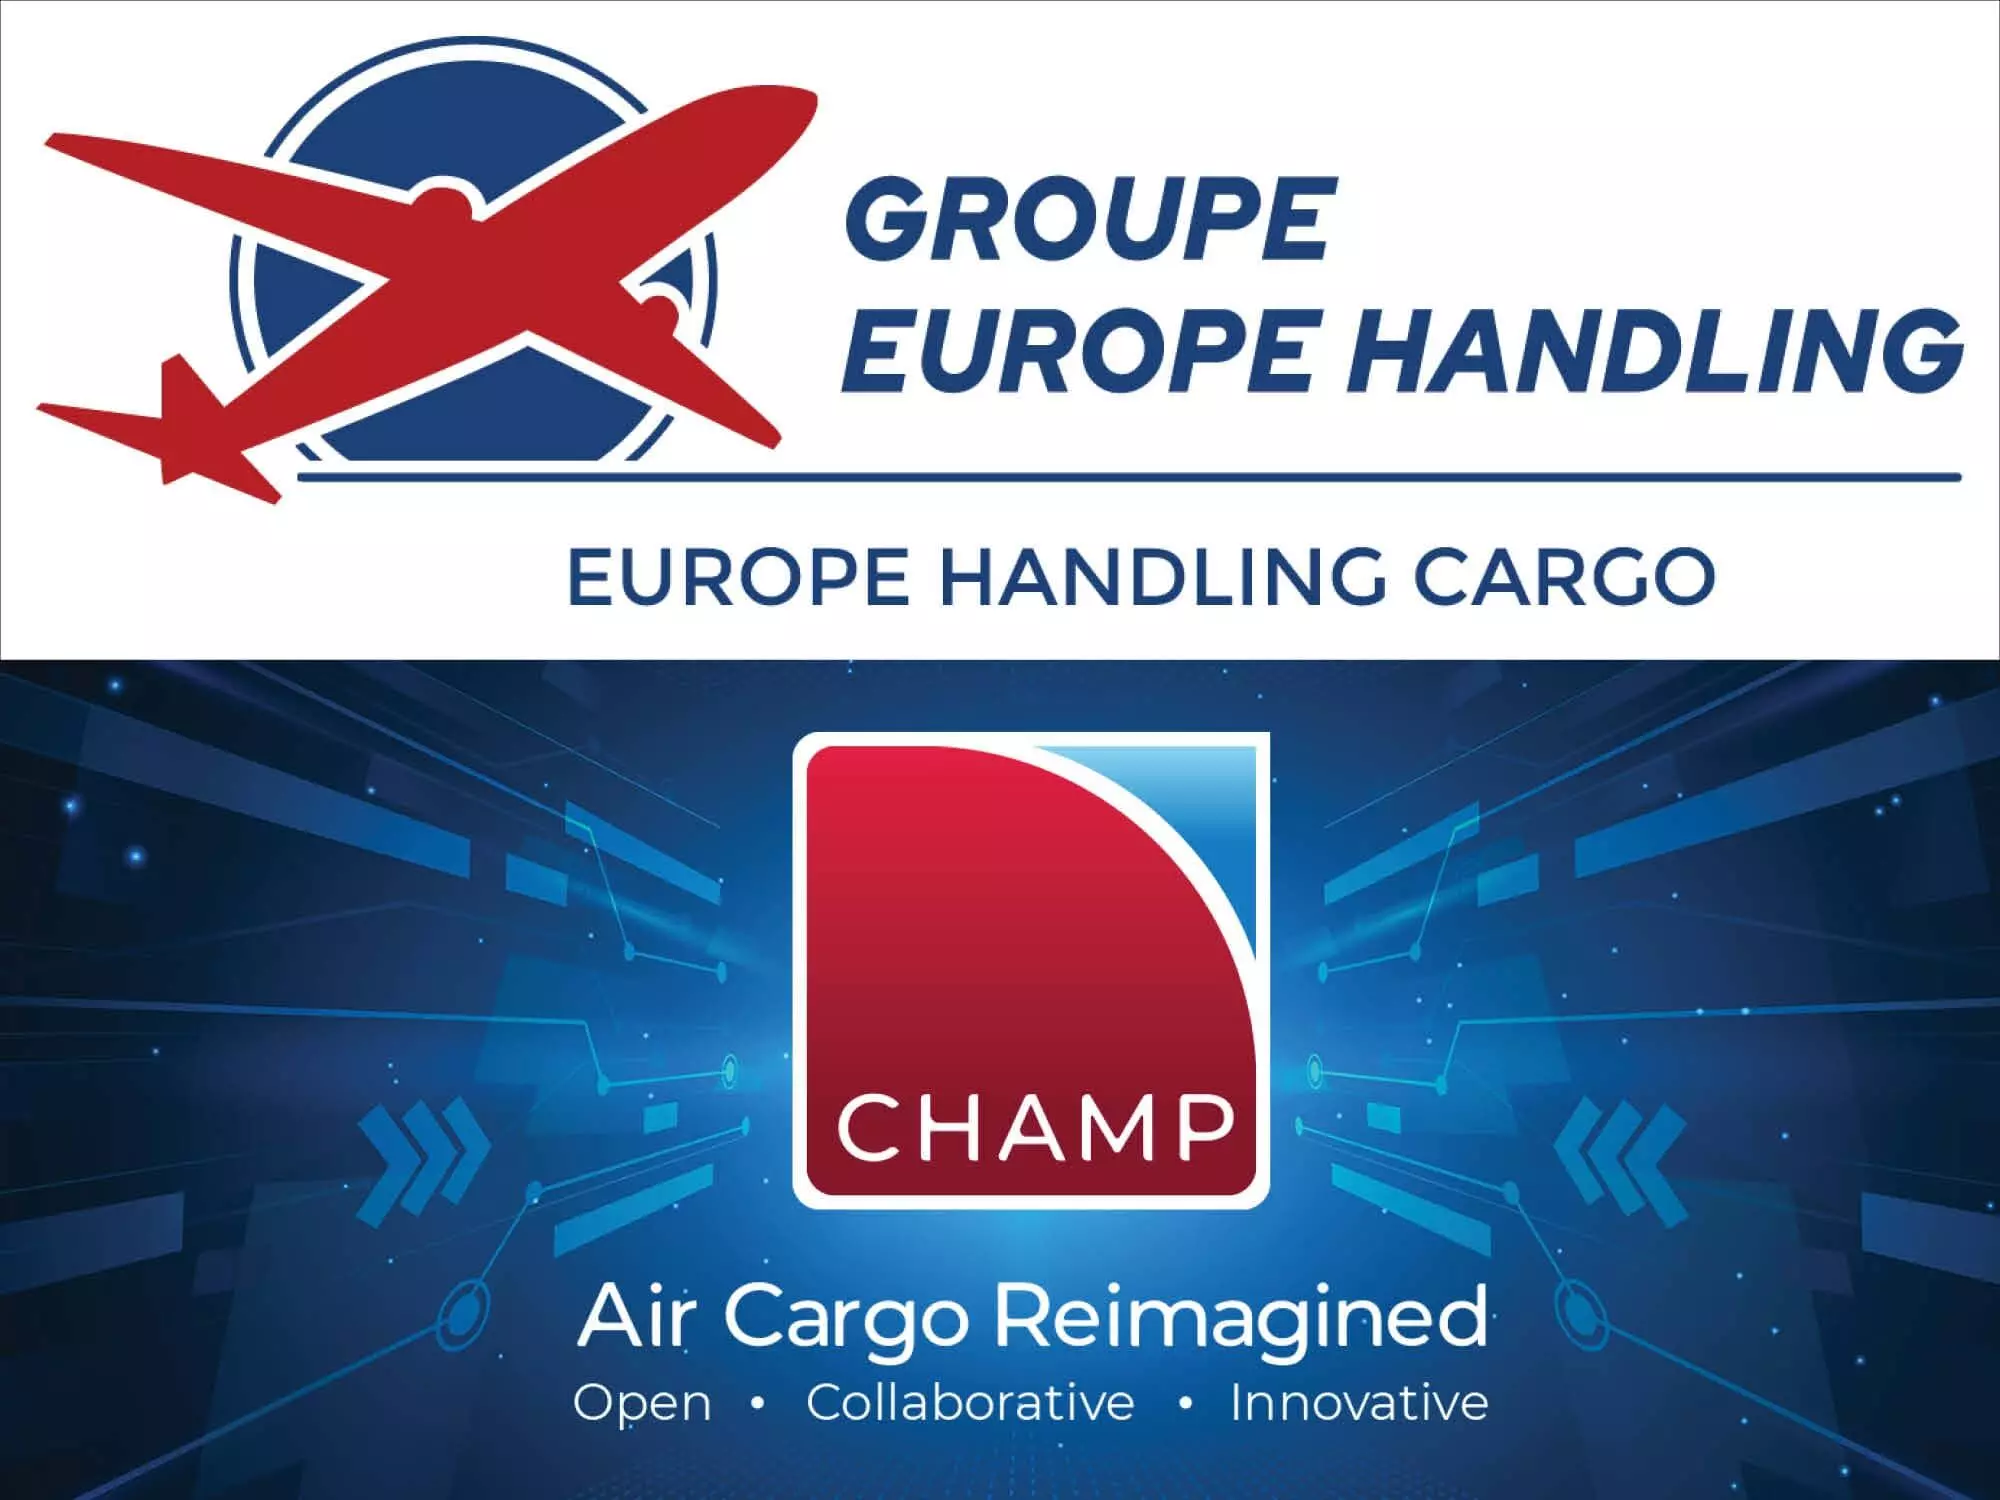 Groupe Europe Handling signs long-term deal with CHAMP Cargosystems